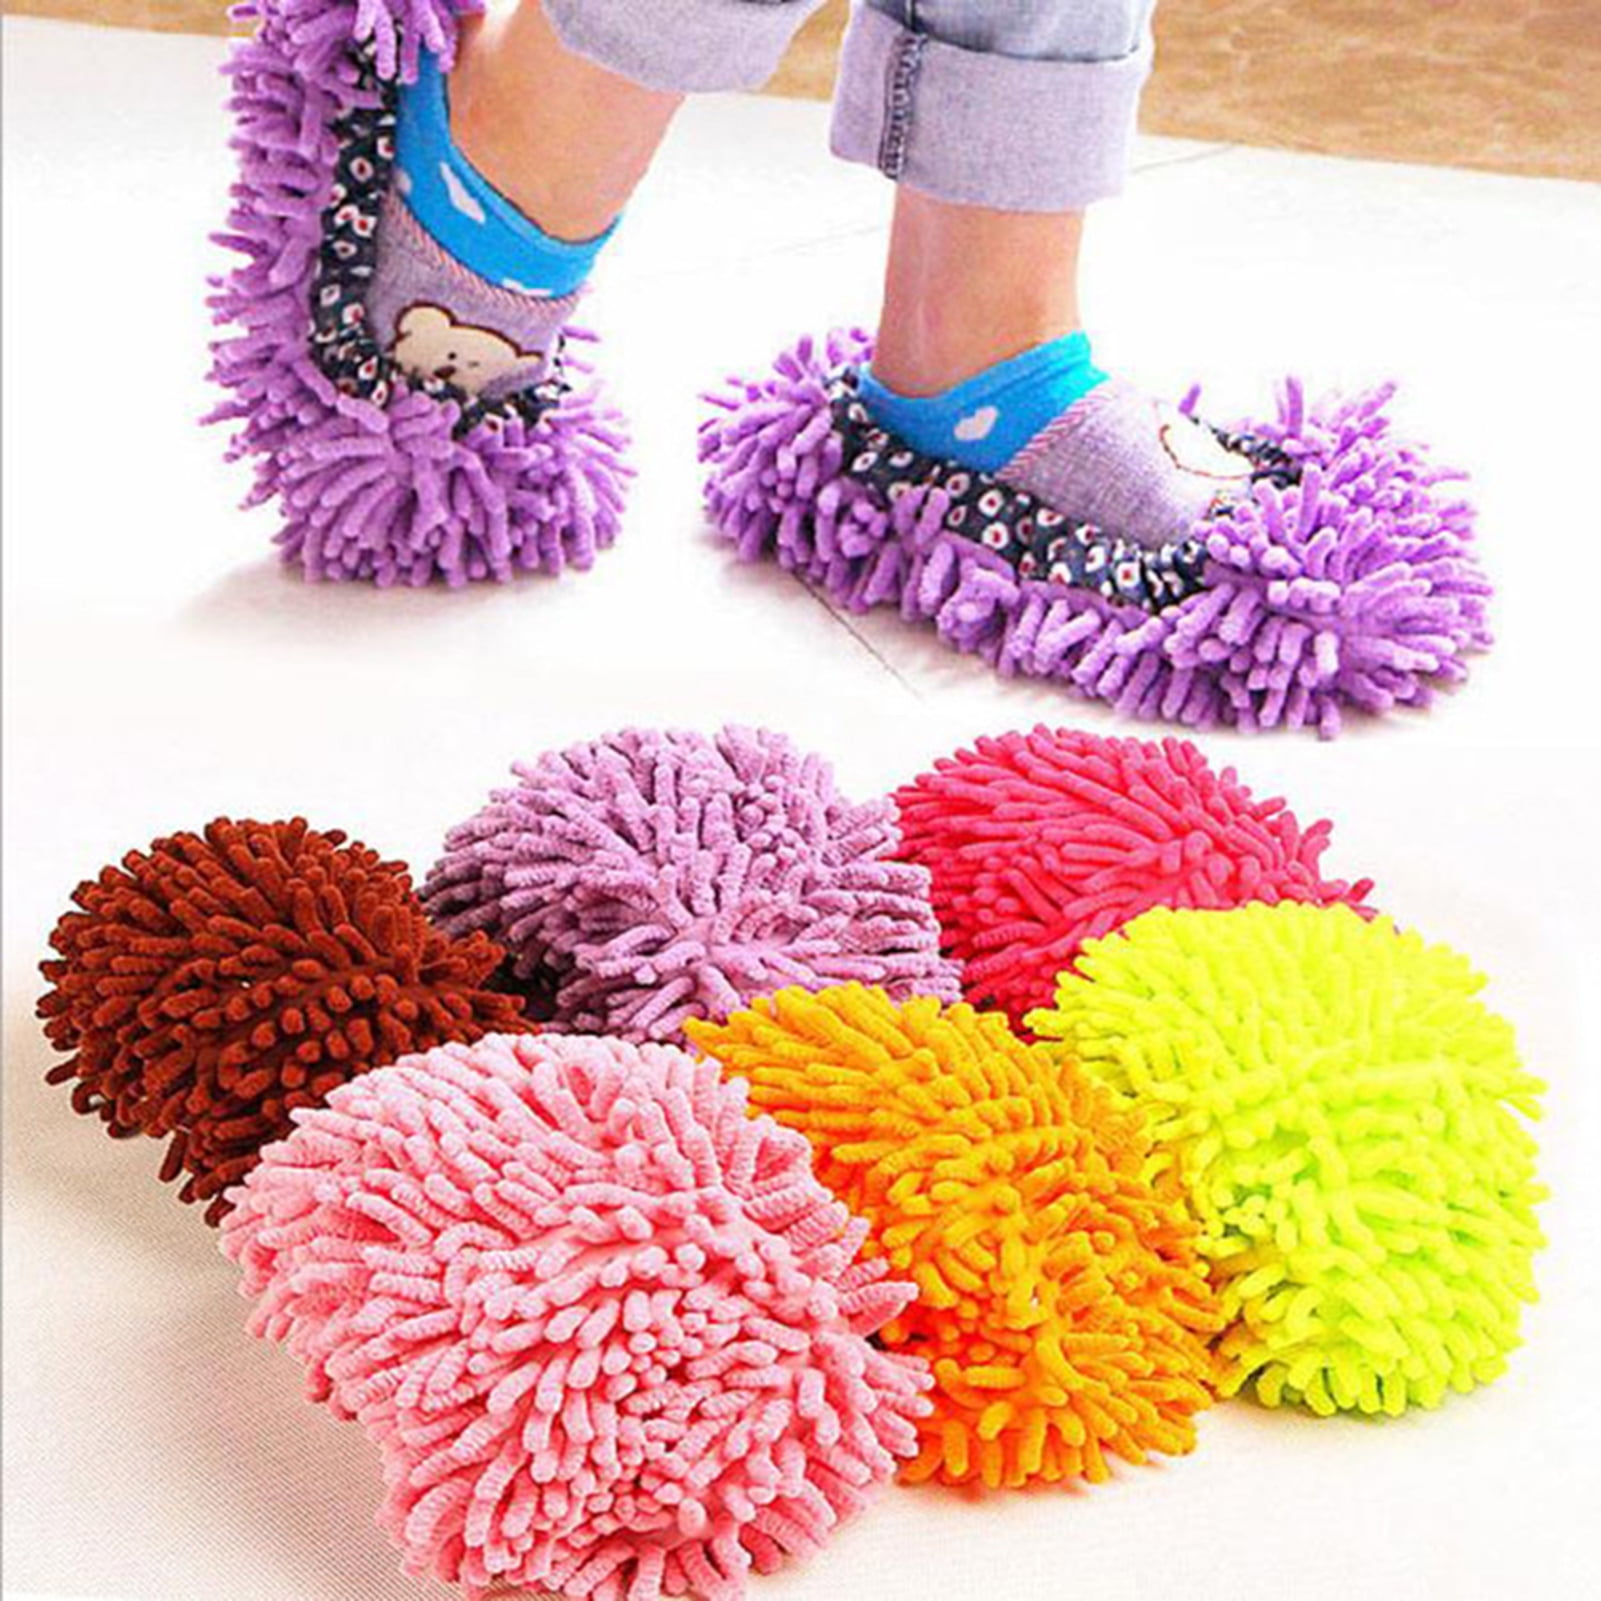 Details about   Microfiber Slippers Shoes Cover Dust Cleaner Bathroom Floor Cleaning Mop 1pc 